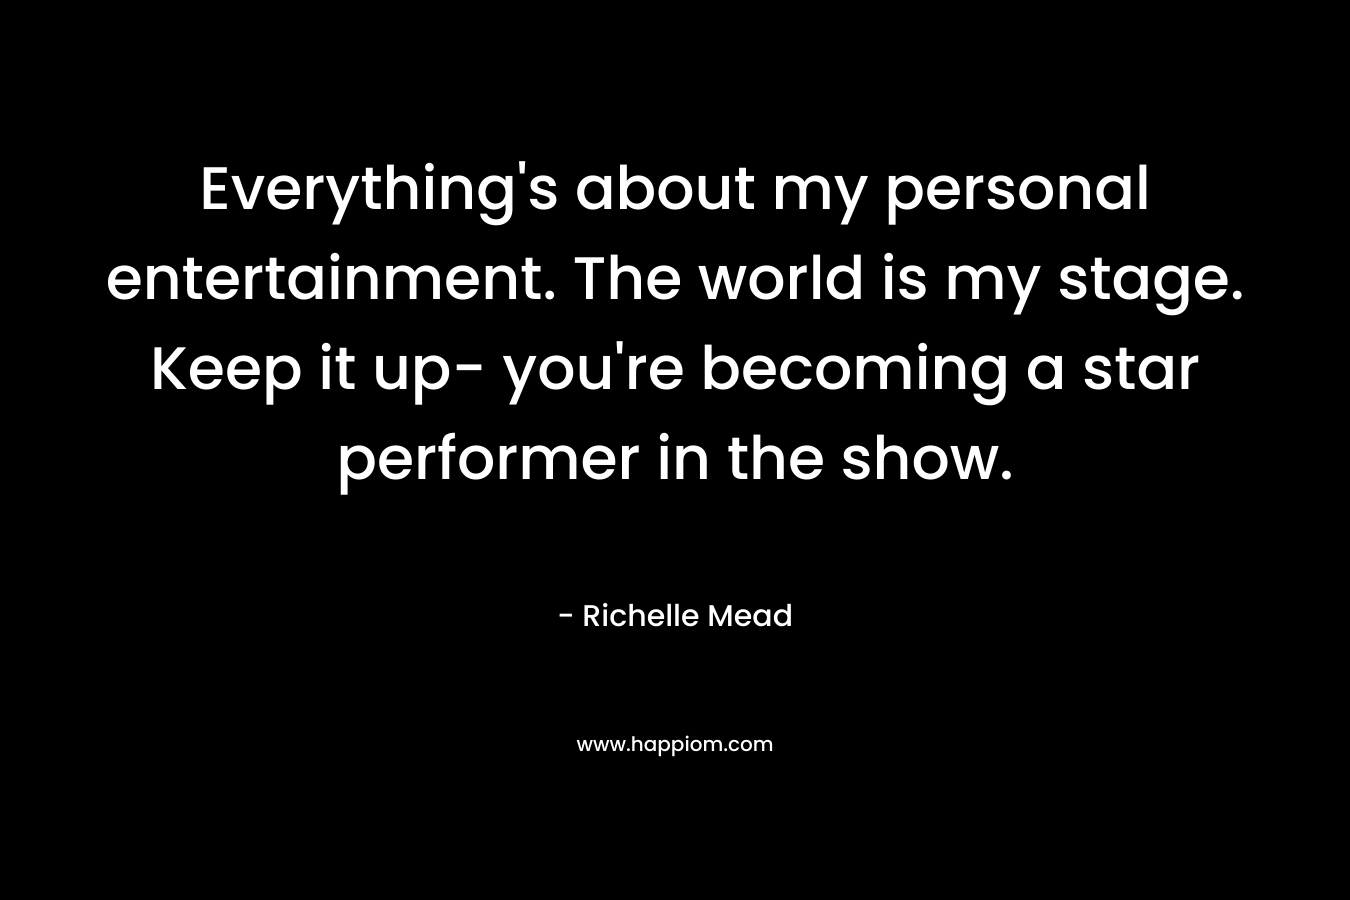 Everything’s about my personal entertainment. The world is my stage. Keep it up- you’re becoming a star performer in the show. – Richelle Mead